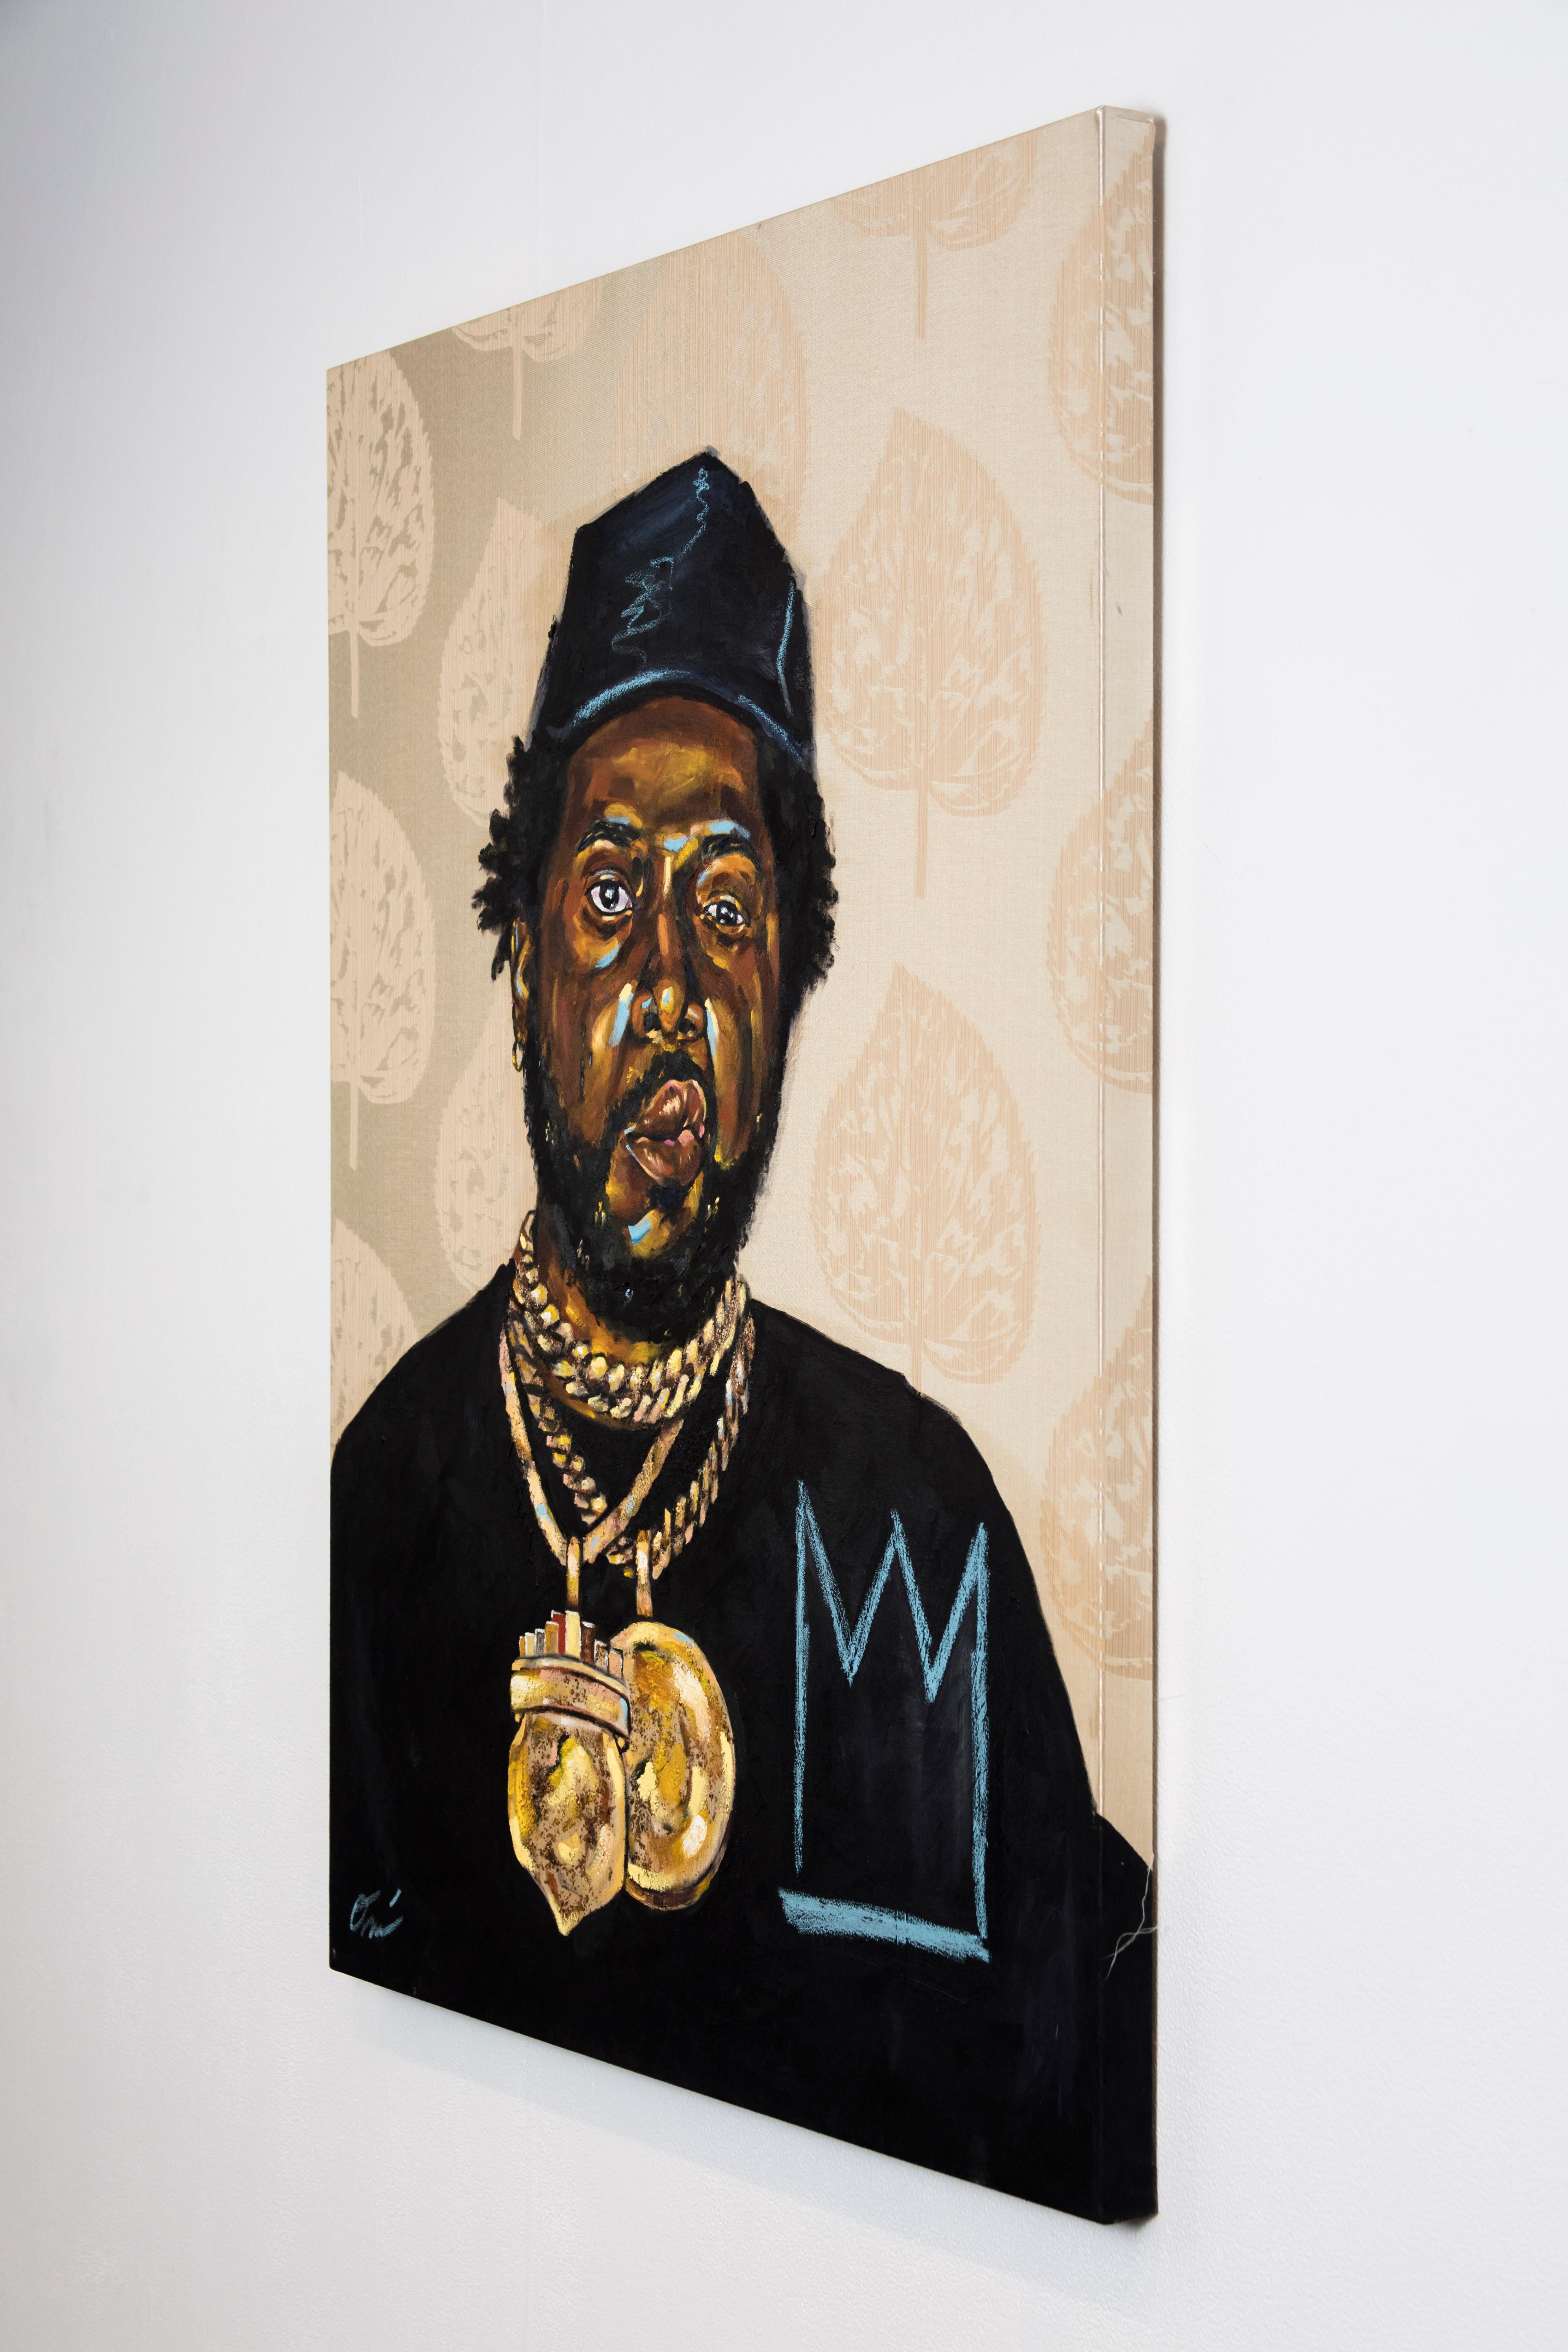 This painting is a portrait of the rapper, Conway The Machine. Rendered on Gold found fabric, Conway is centered in the composition, meeting the viewer's gaze with a brash expression. He wears a black hat, several gold chains, and a black shirt with